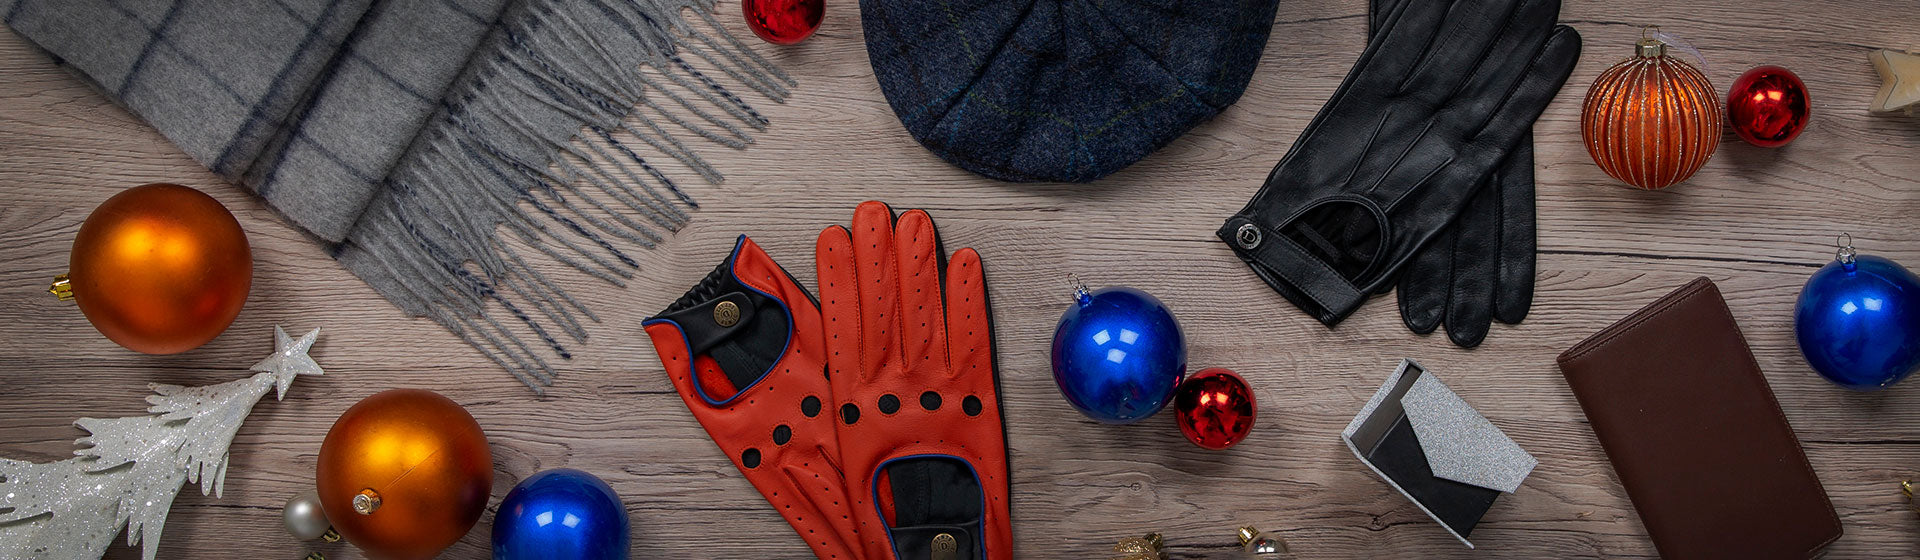 Christmas Gift Guide: Stylish gifts for Him